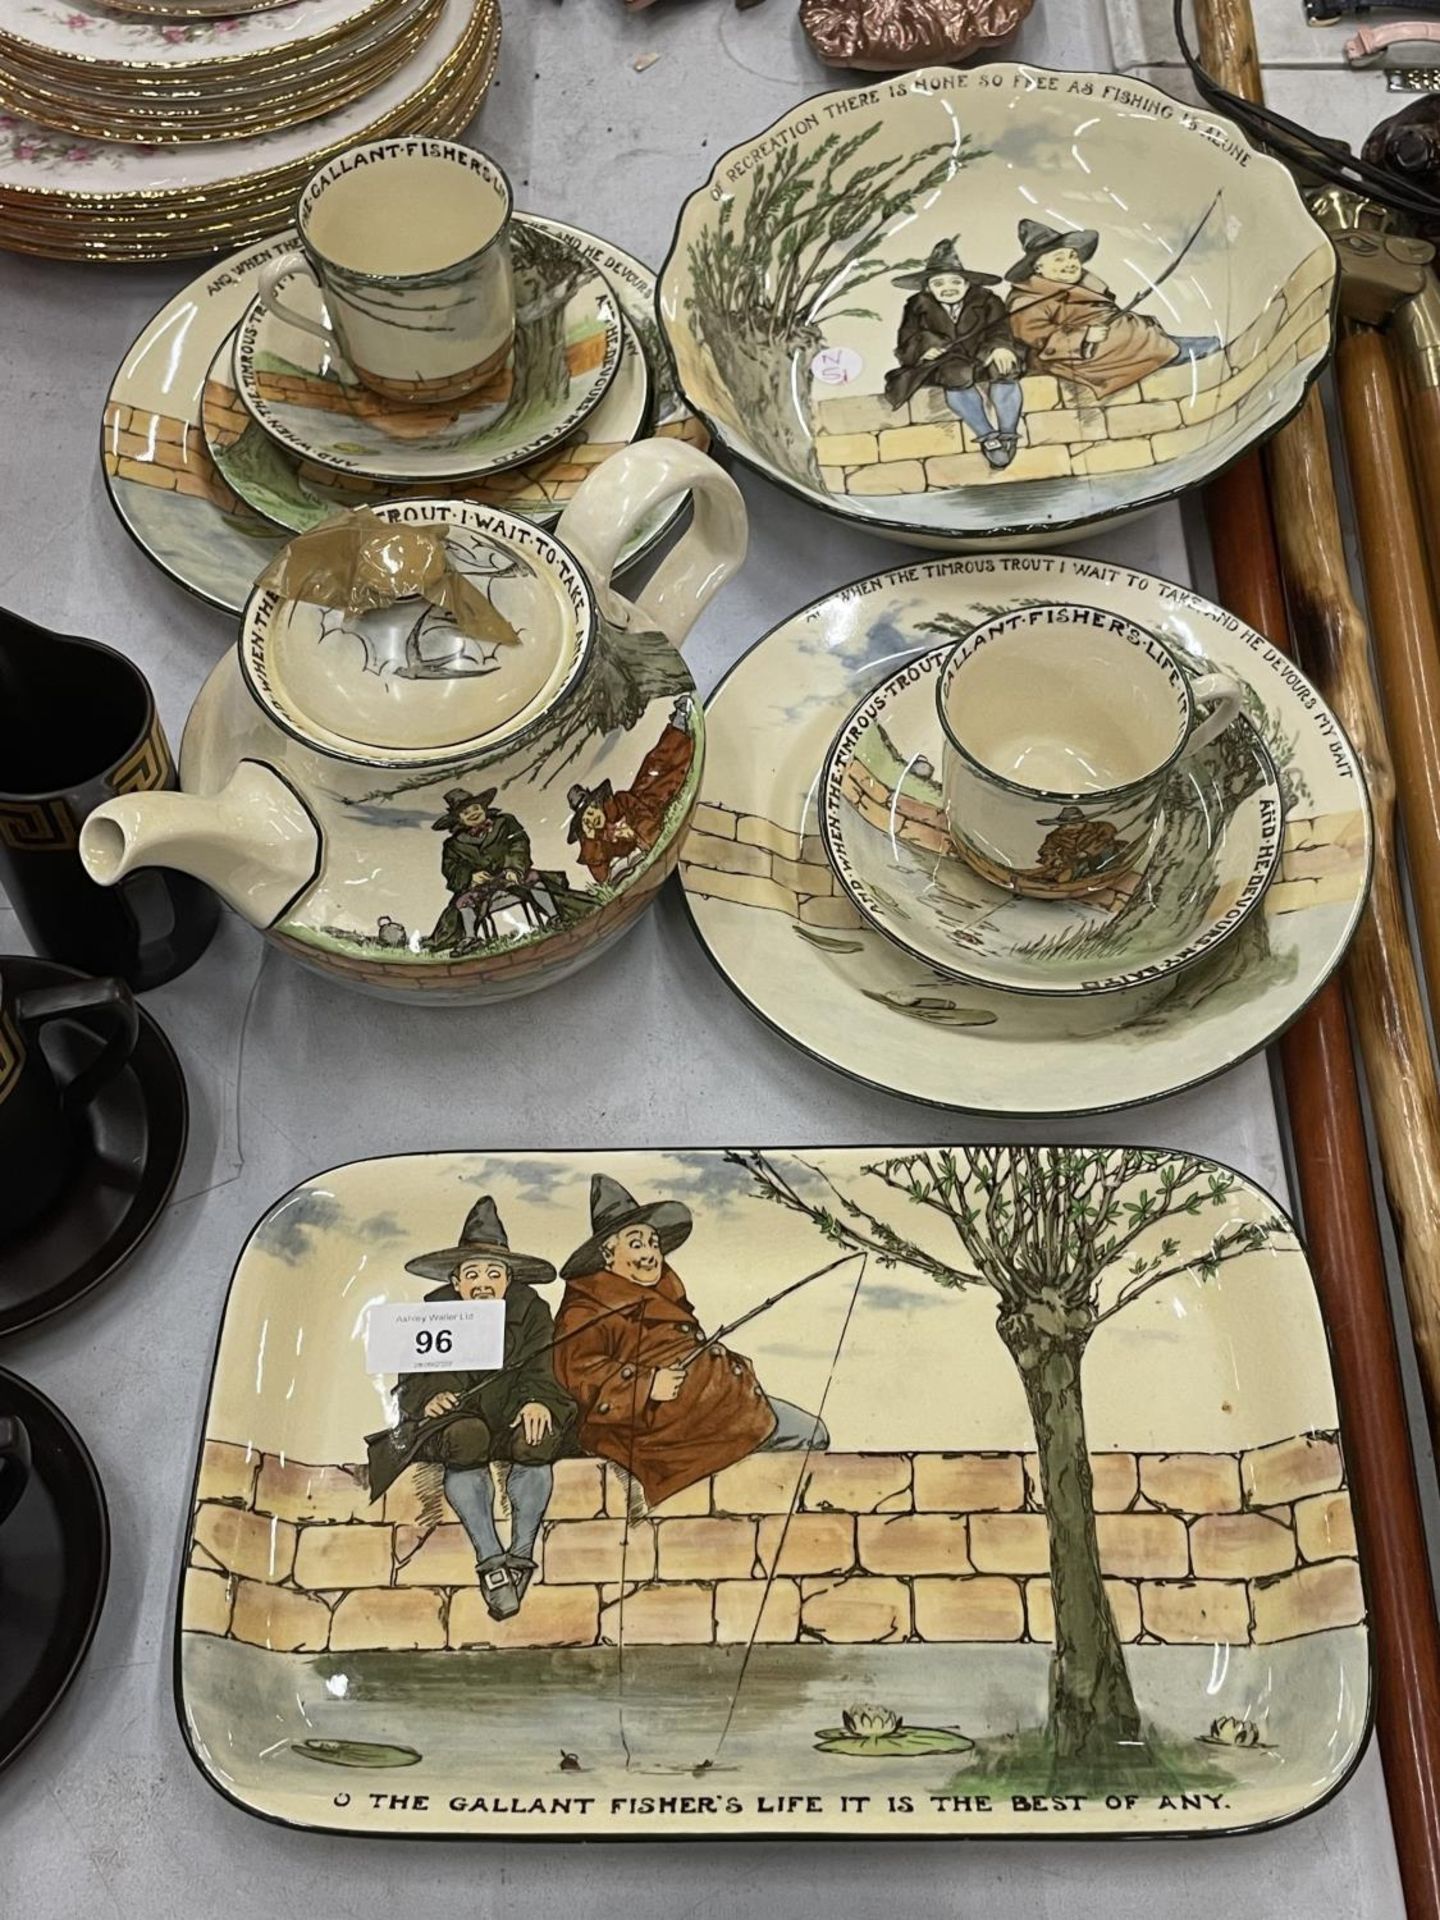 A QUANTITY OF ROYAL DOULTON 'THE GALLANT FISHERS' SERIES WARE TO INCLUDE PLATES, BOWLS, TEAPOT, CUPS